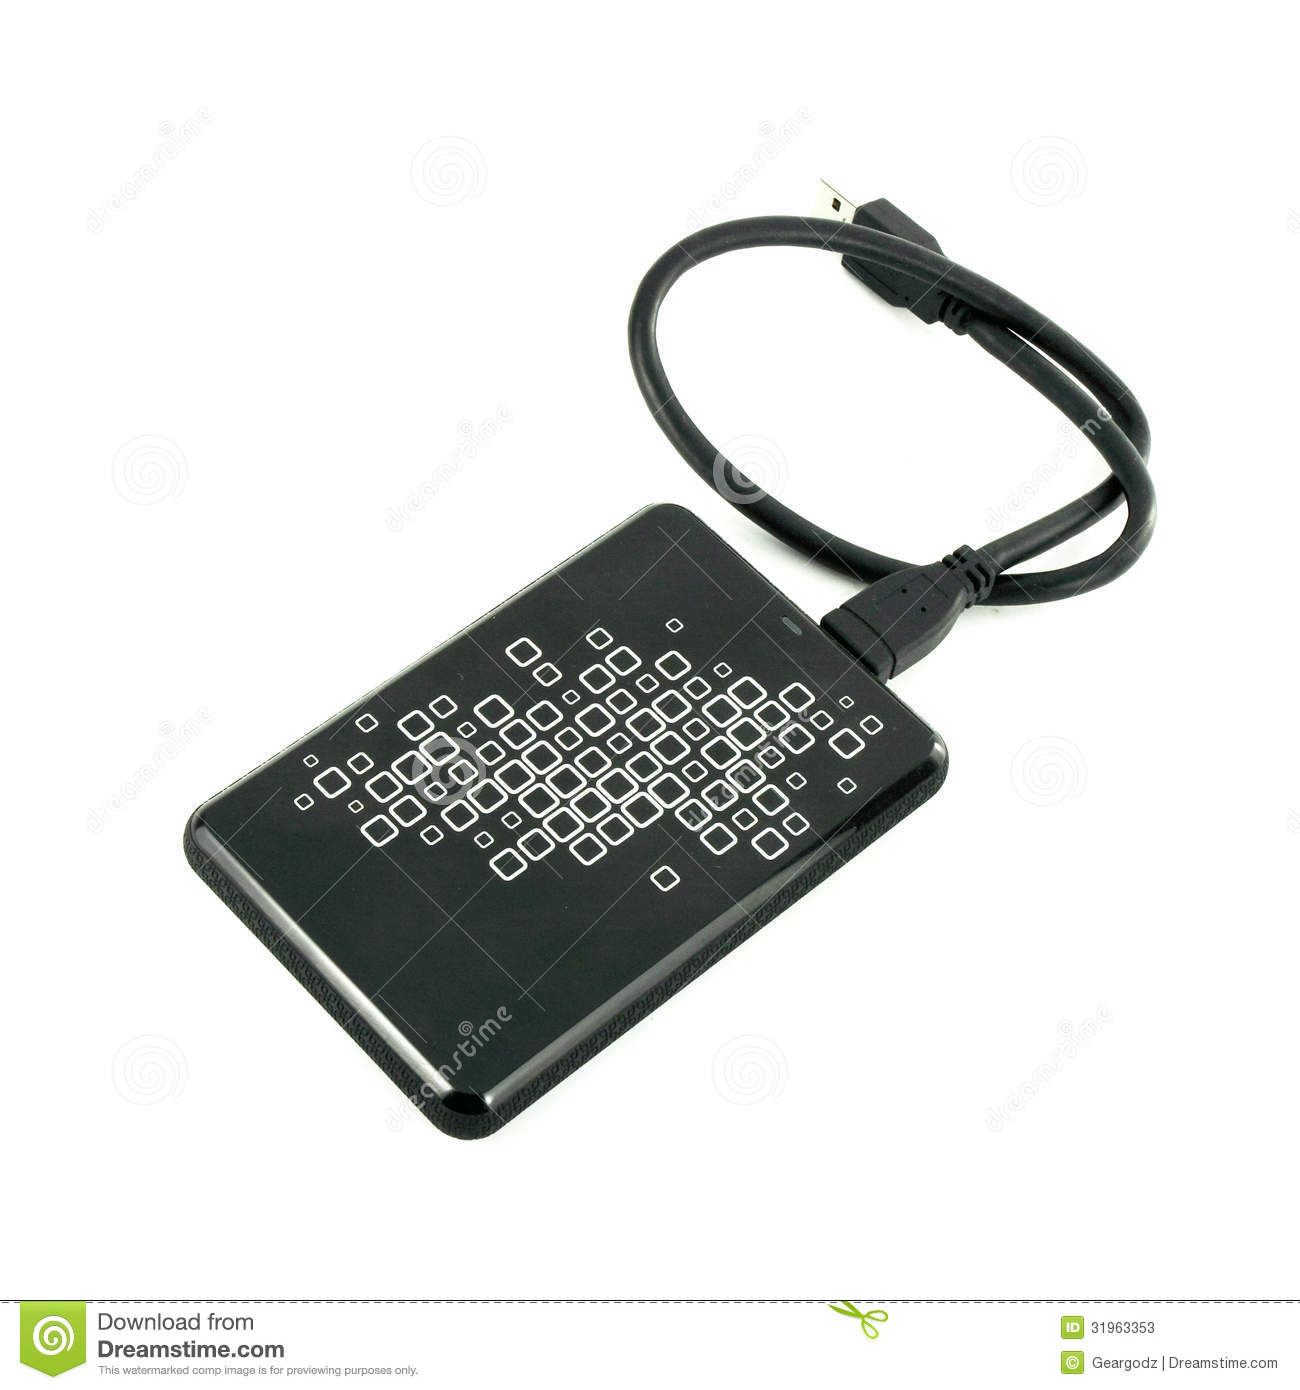 Portable External Hdd Hard Disk Drive With Usb Cable Stock Photos    